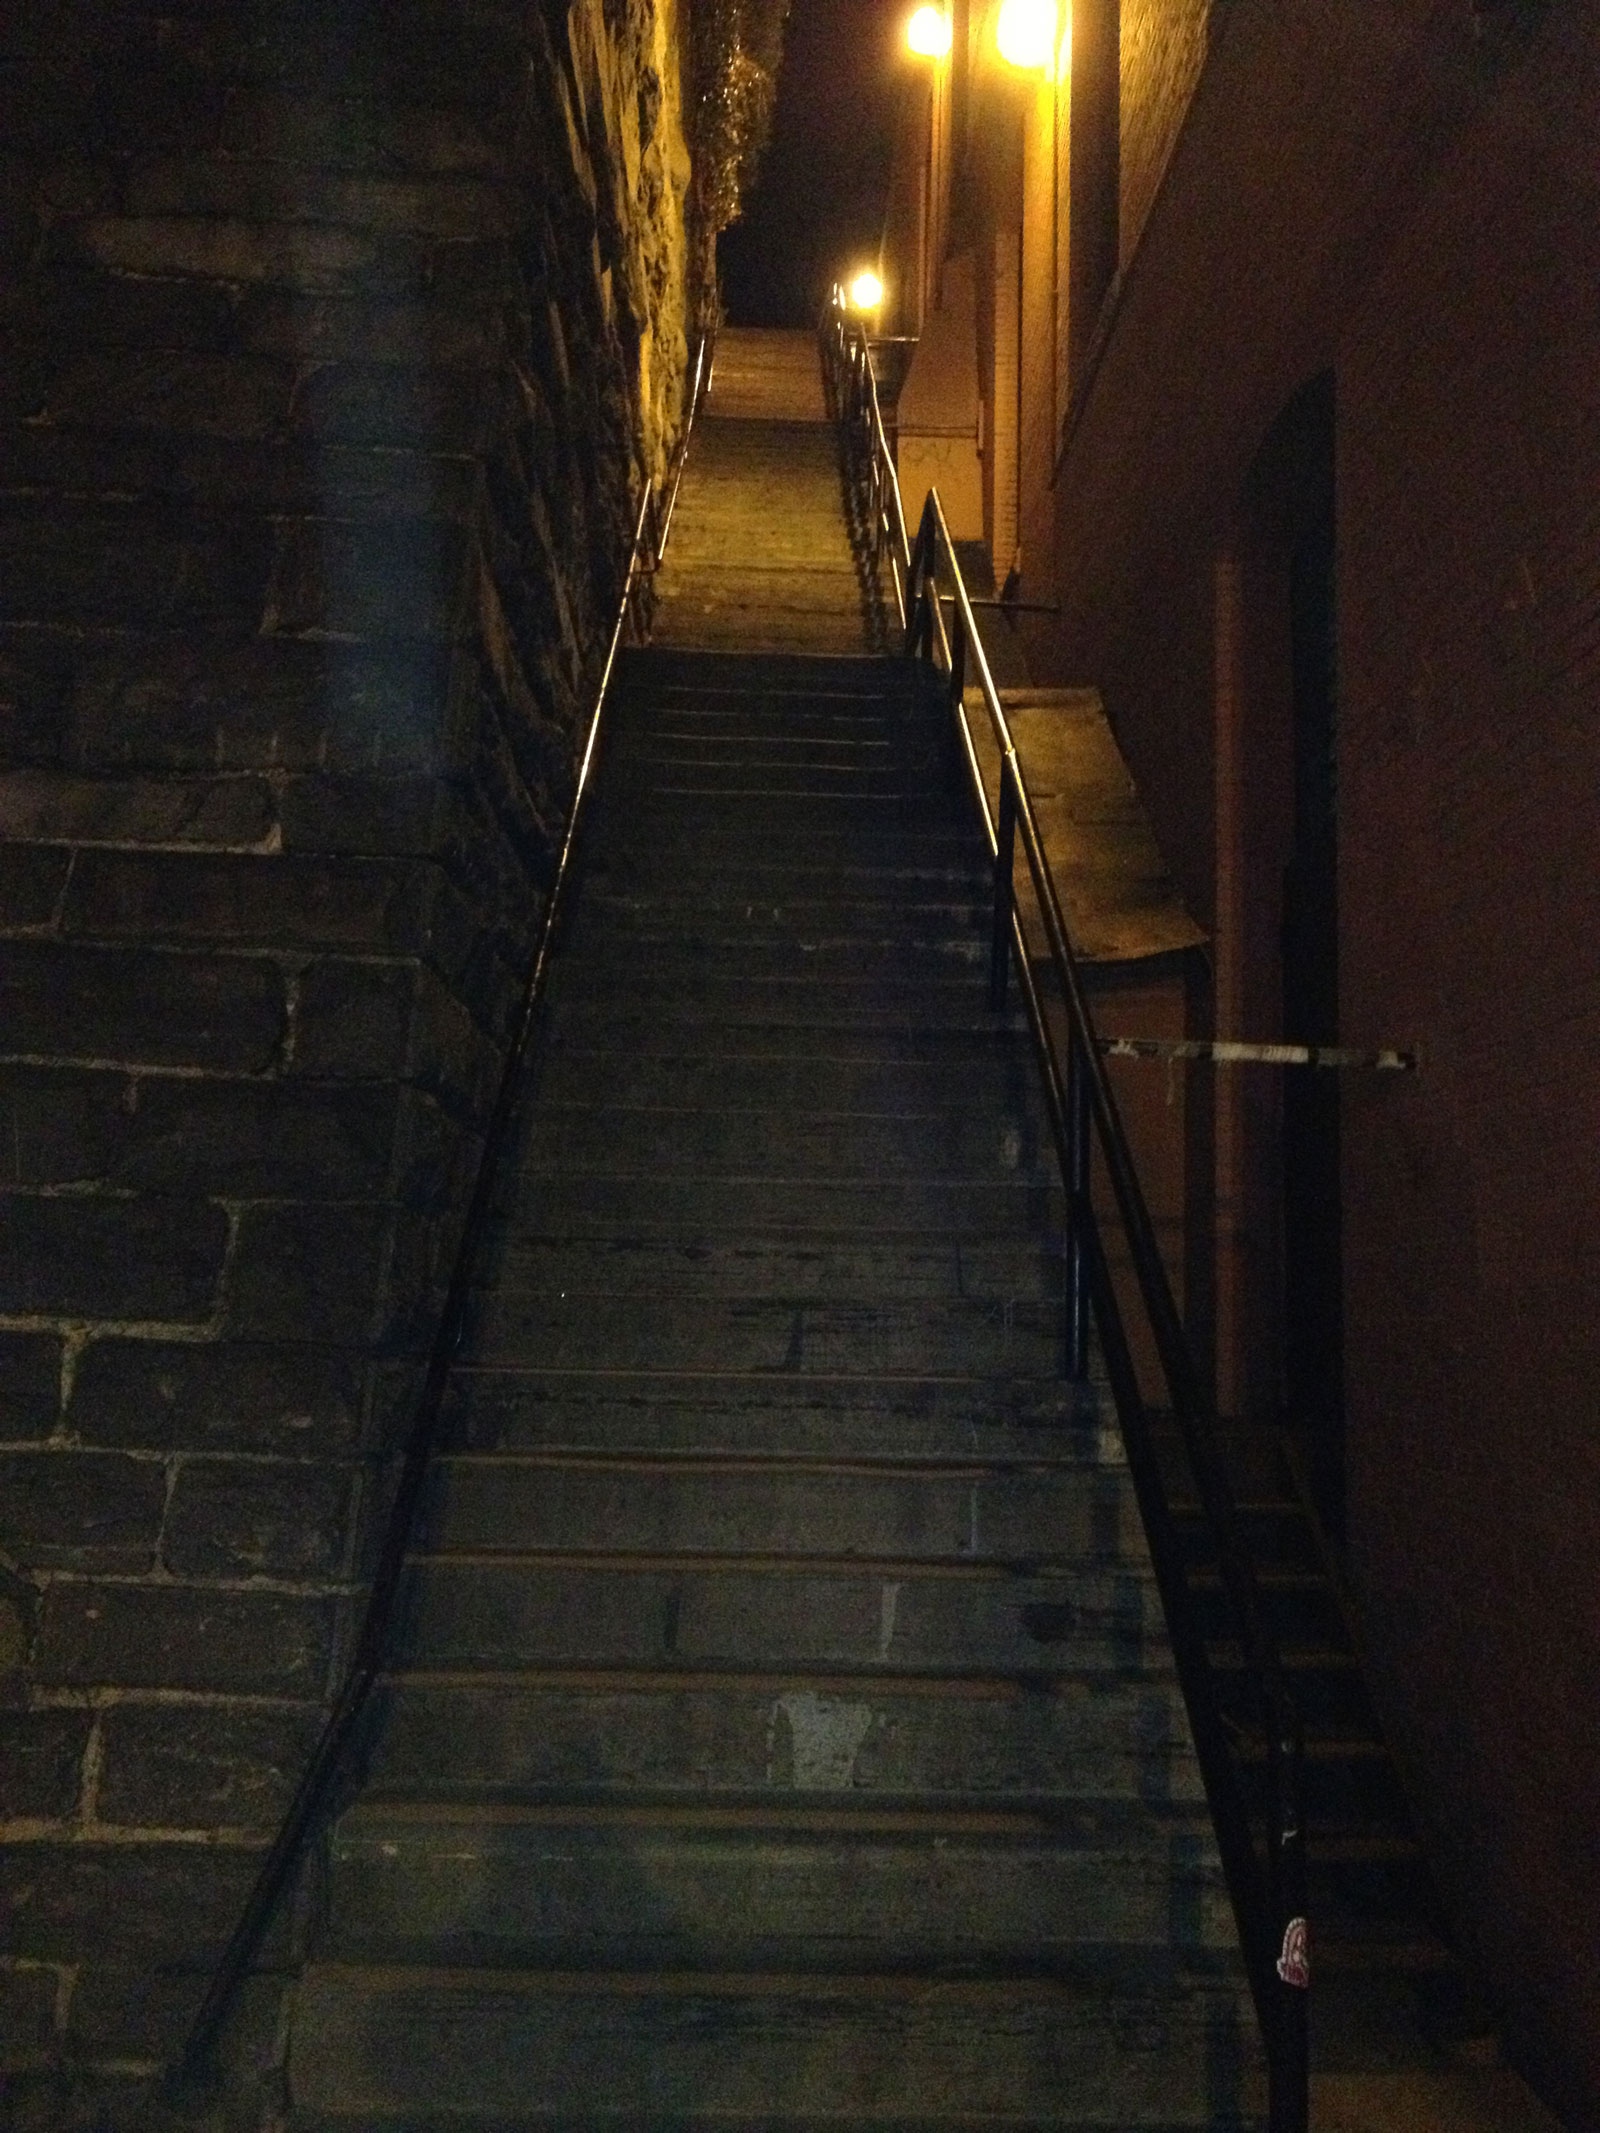 Condo building would verge on ‘Exorcist Steps’ site